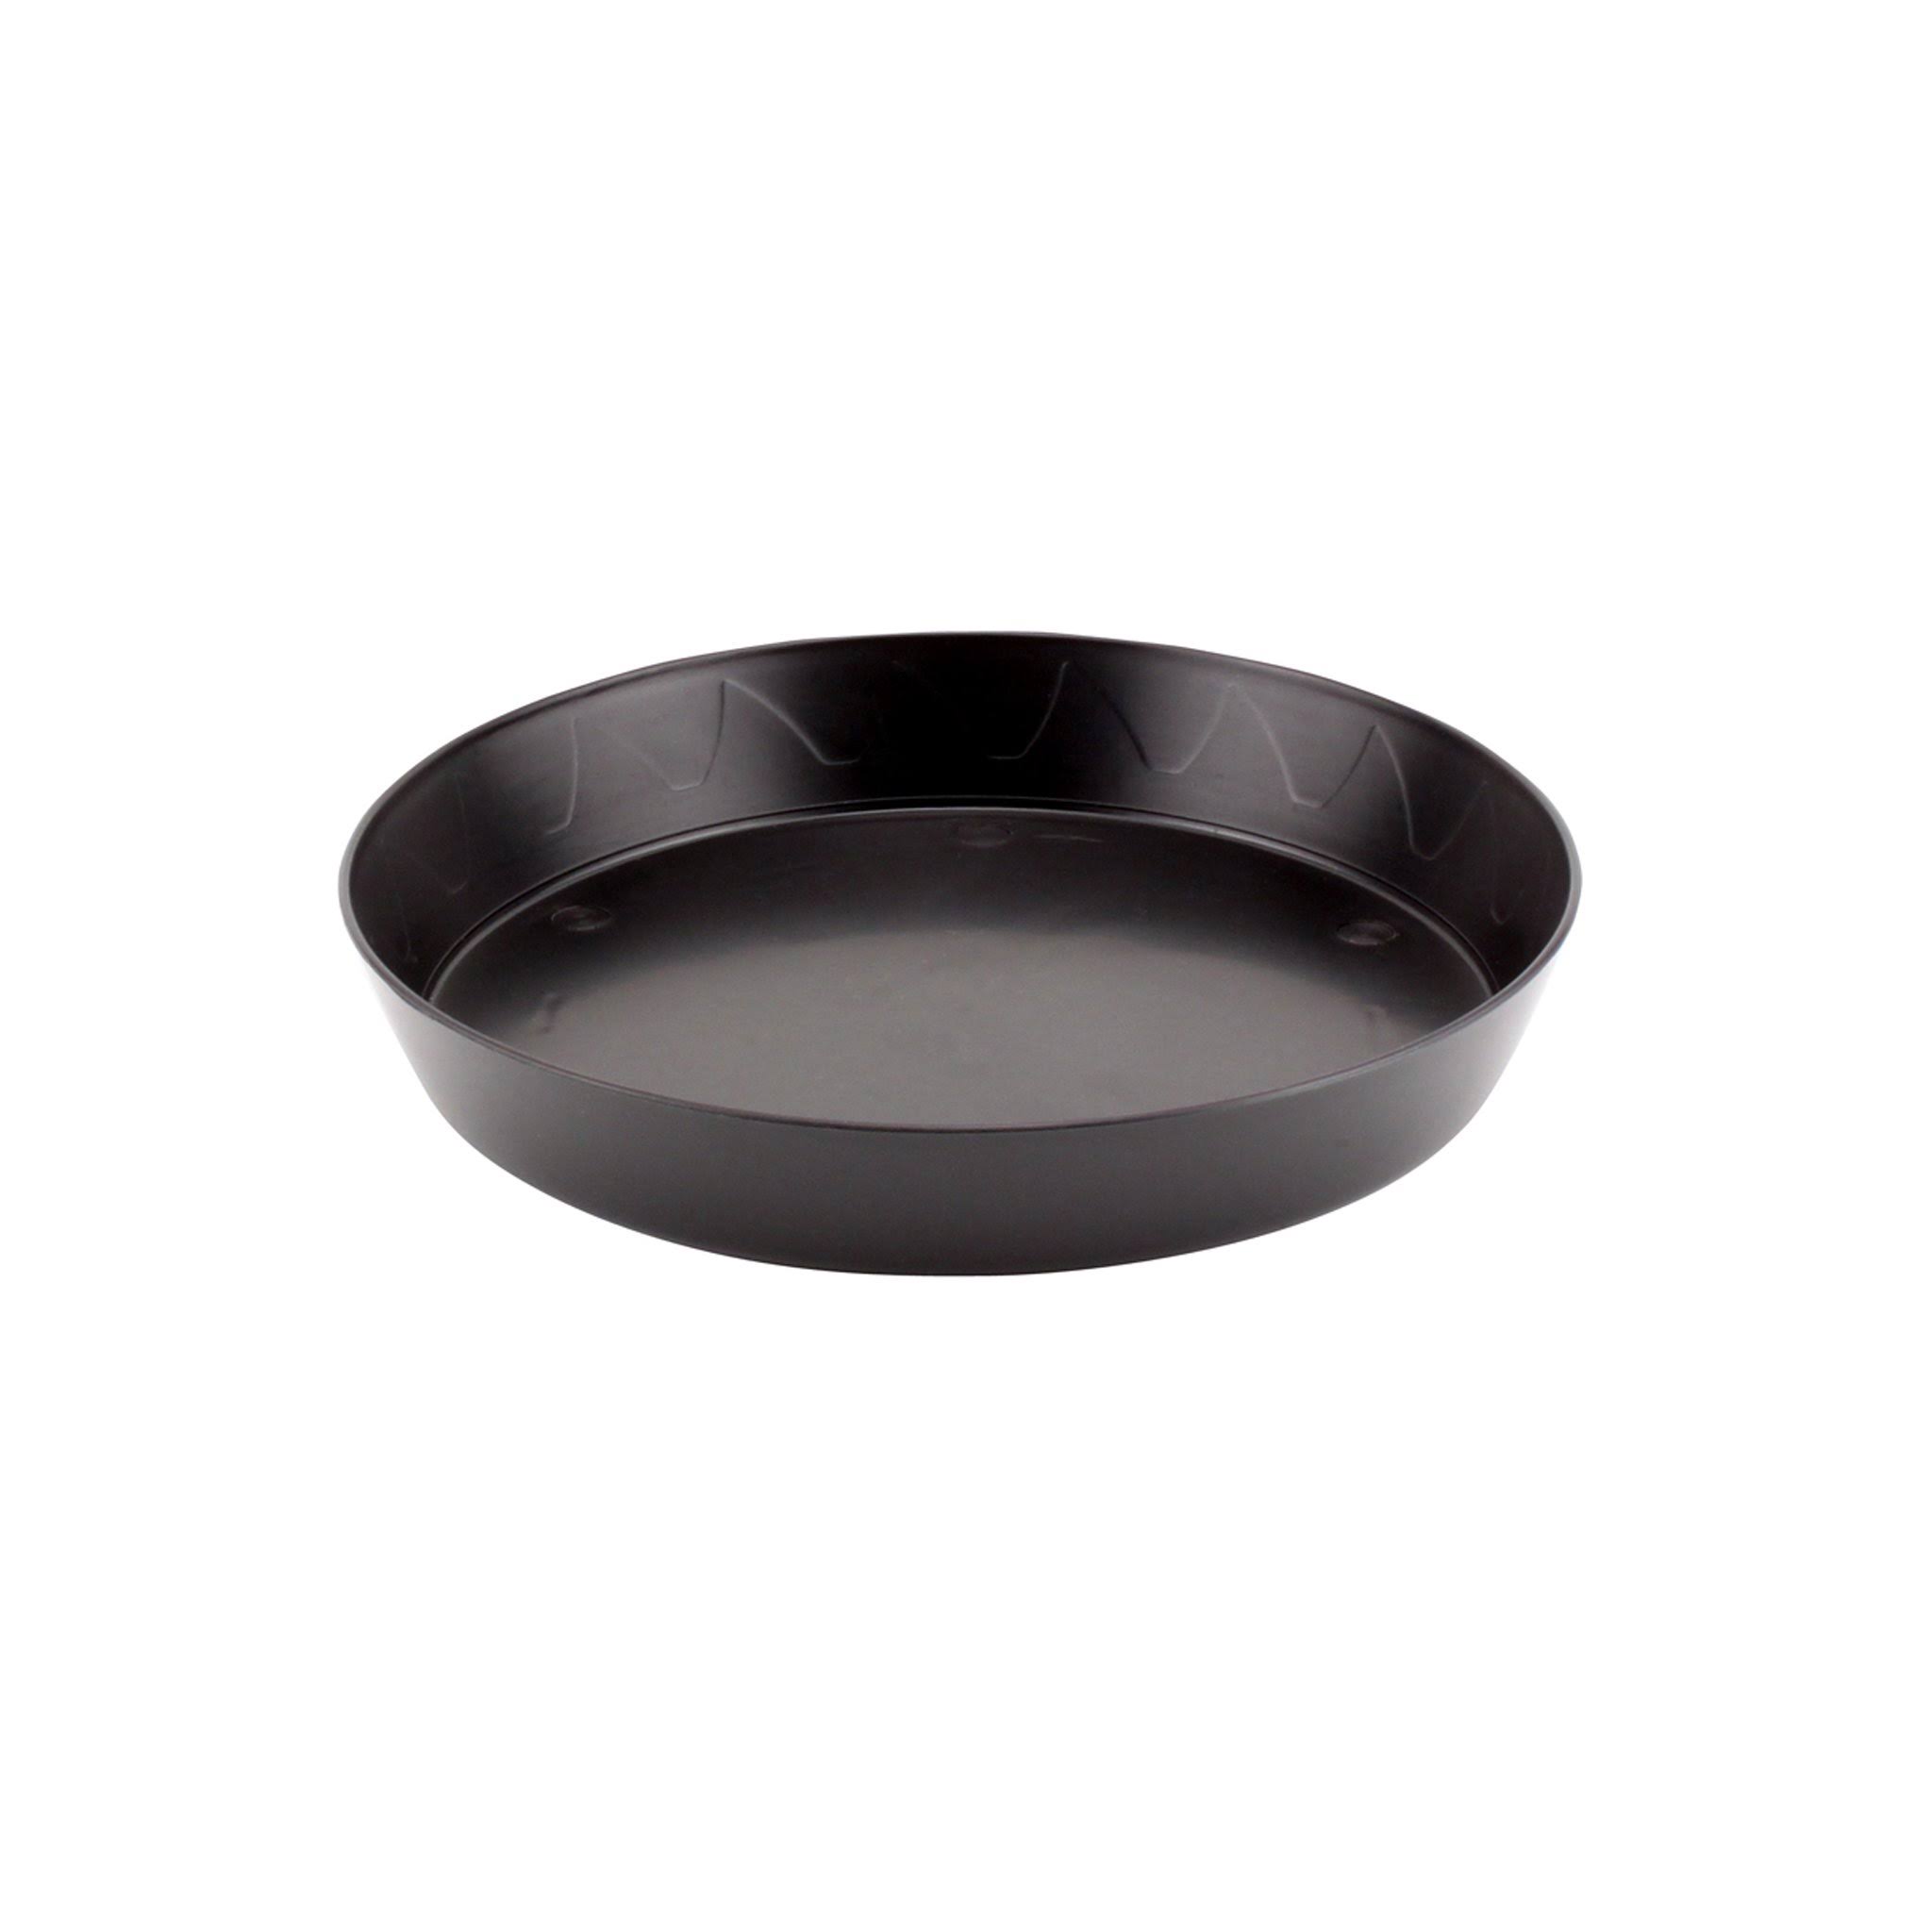 Gro Pro Garden Products Saucer - Black, 10"